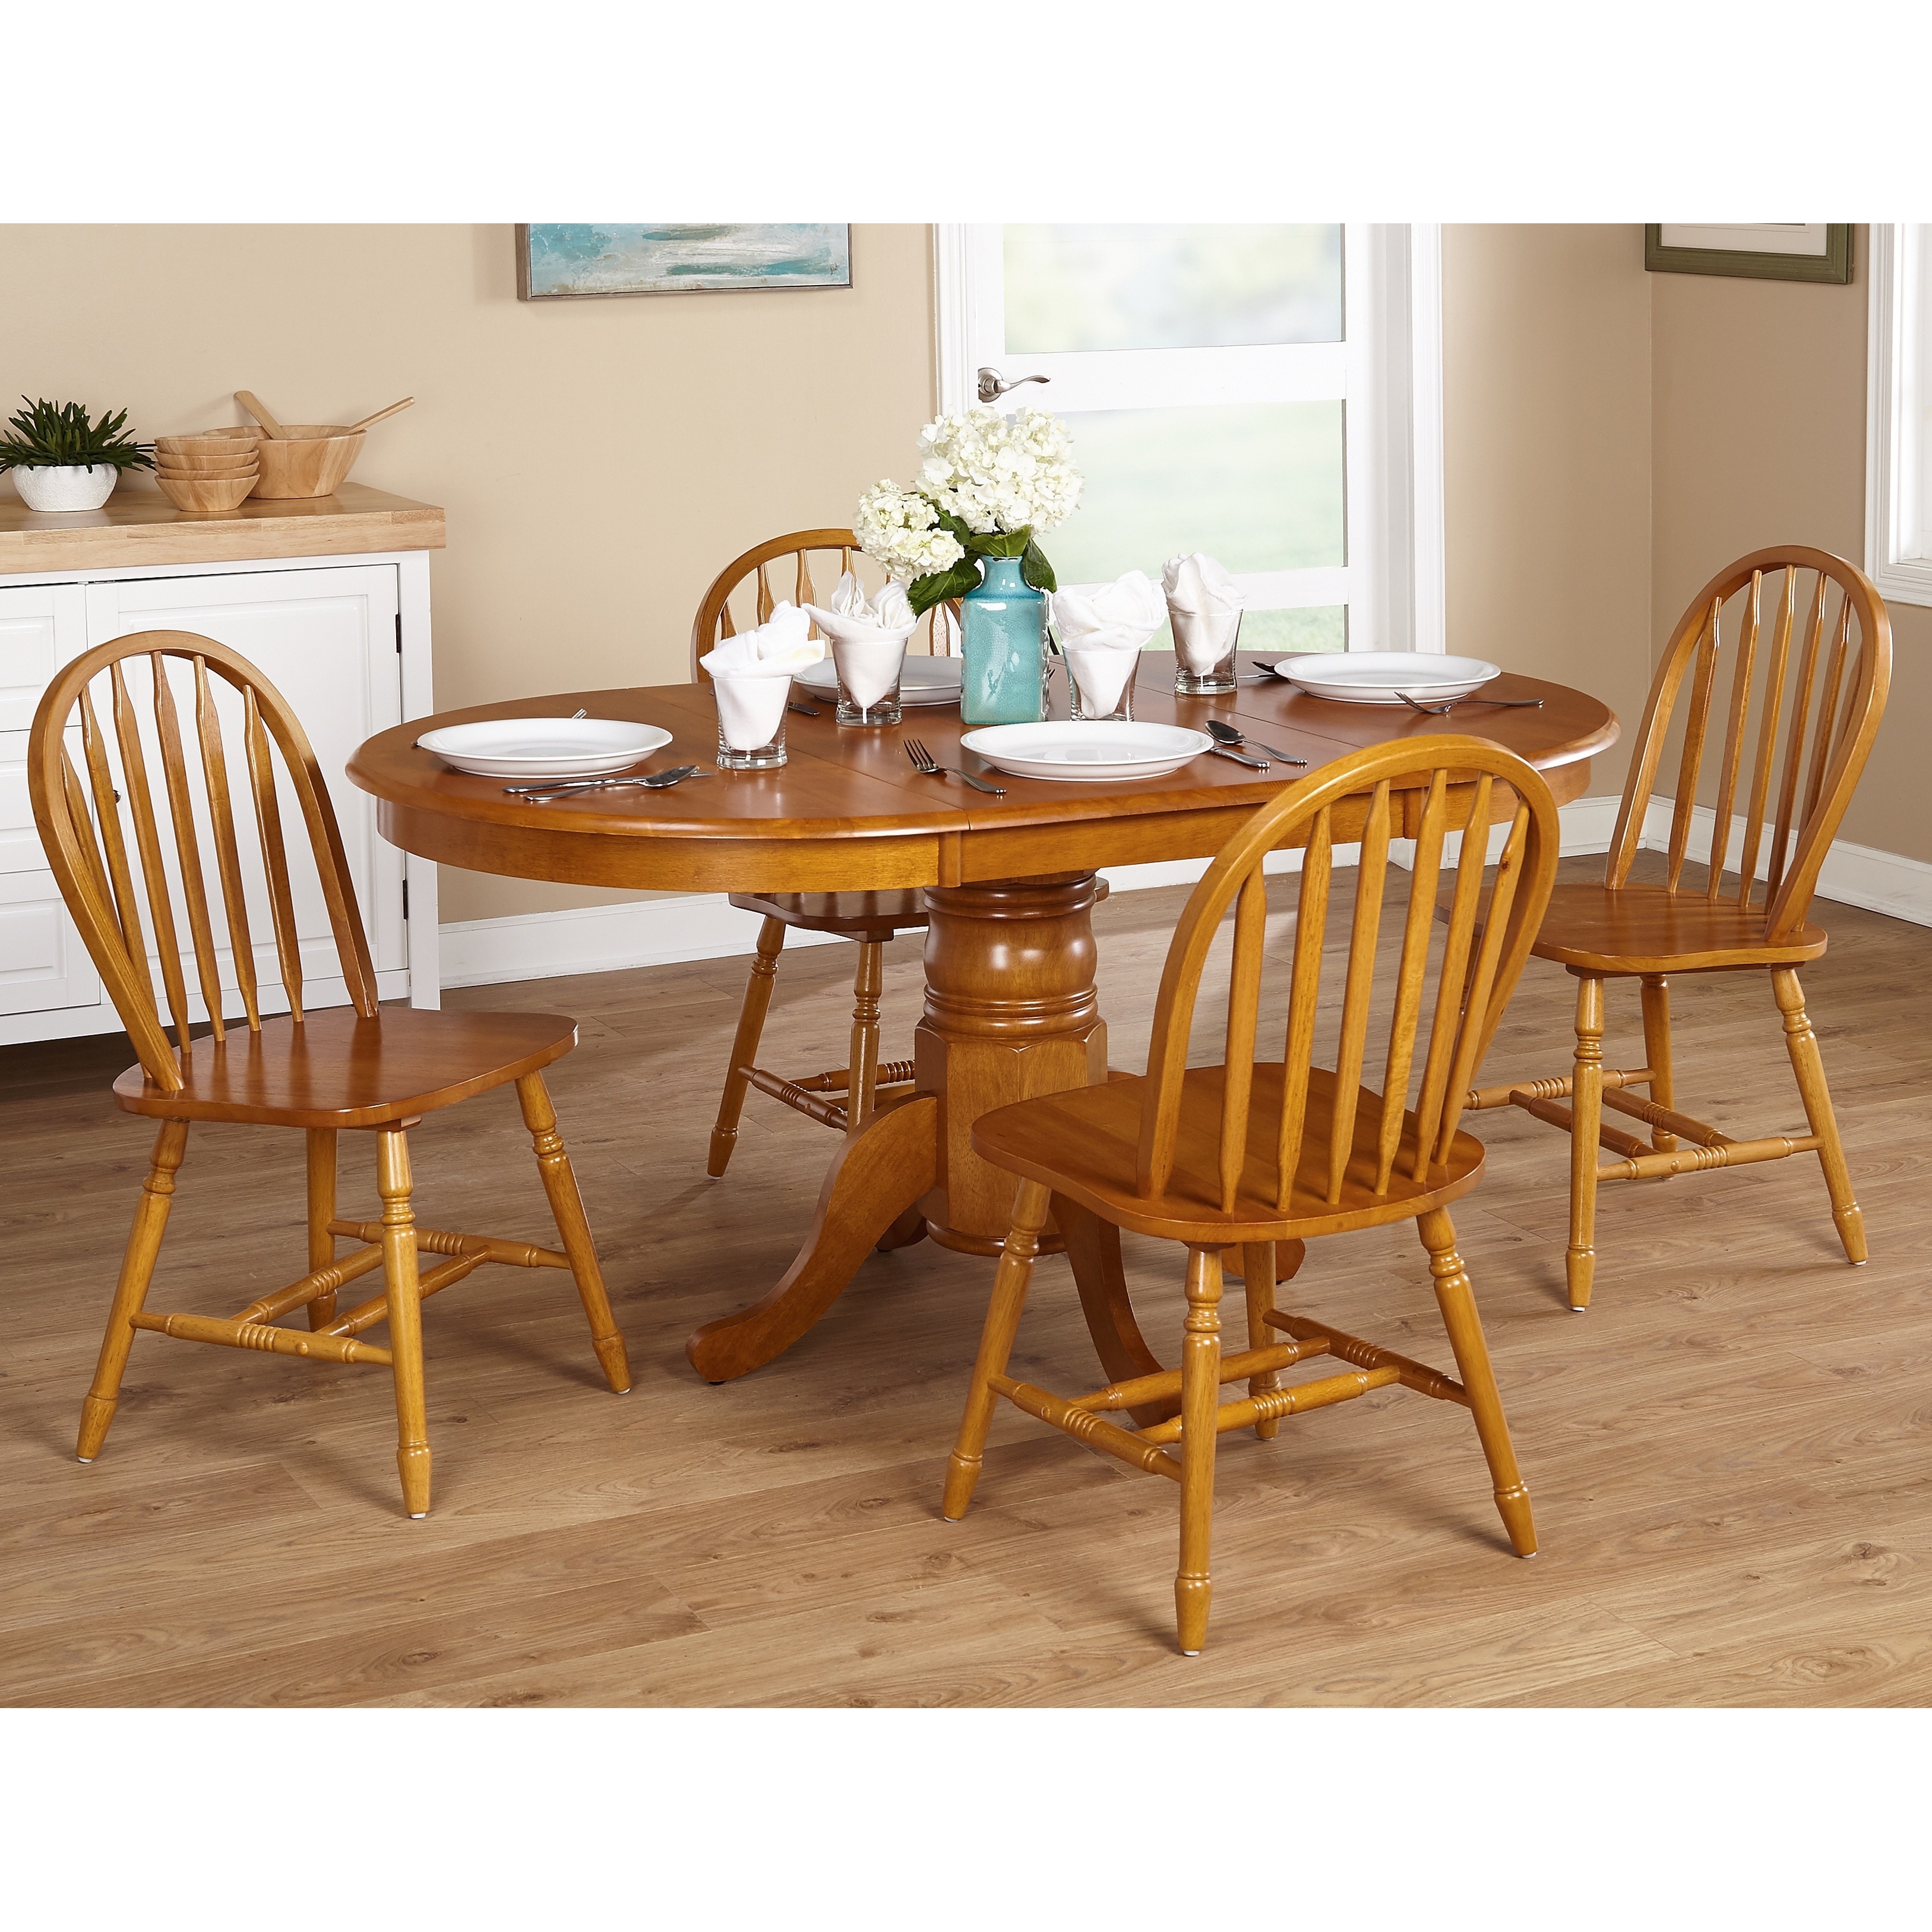 Oak Farmhouse Table And Chairs